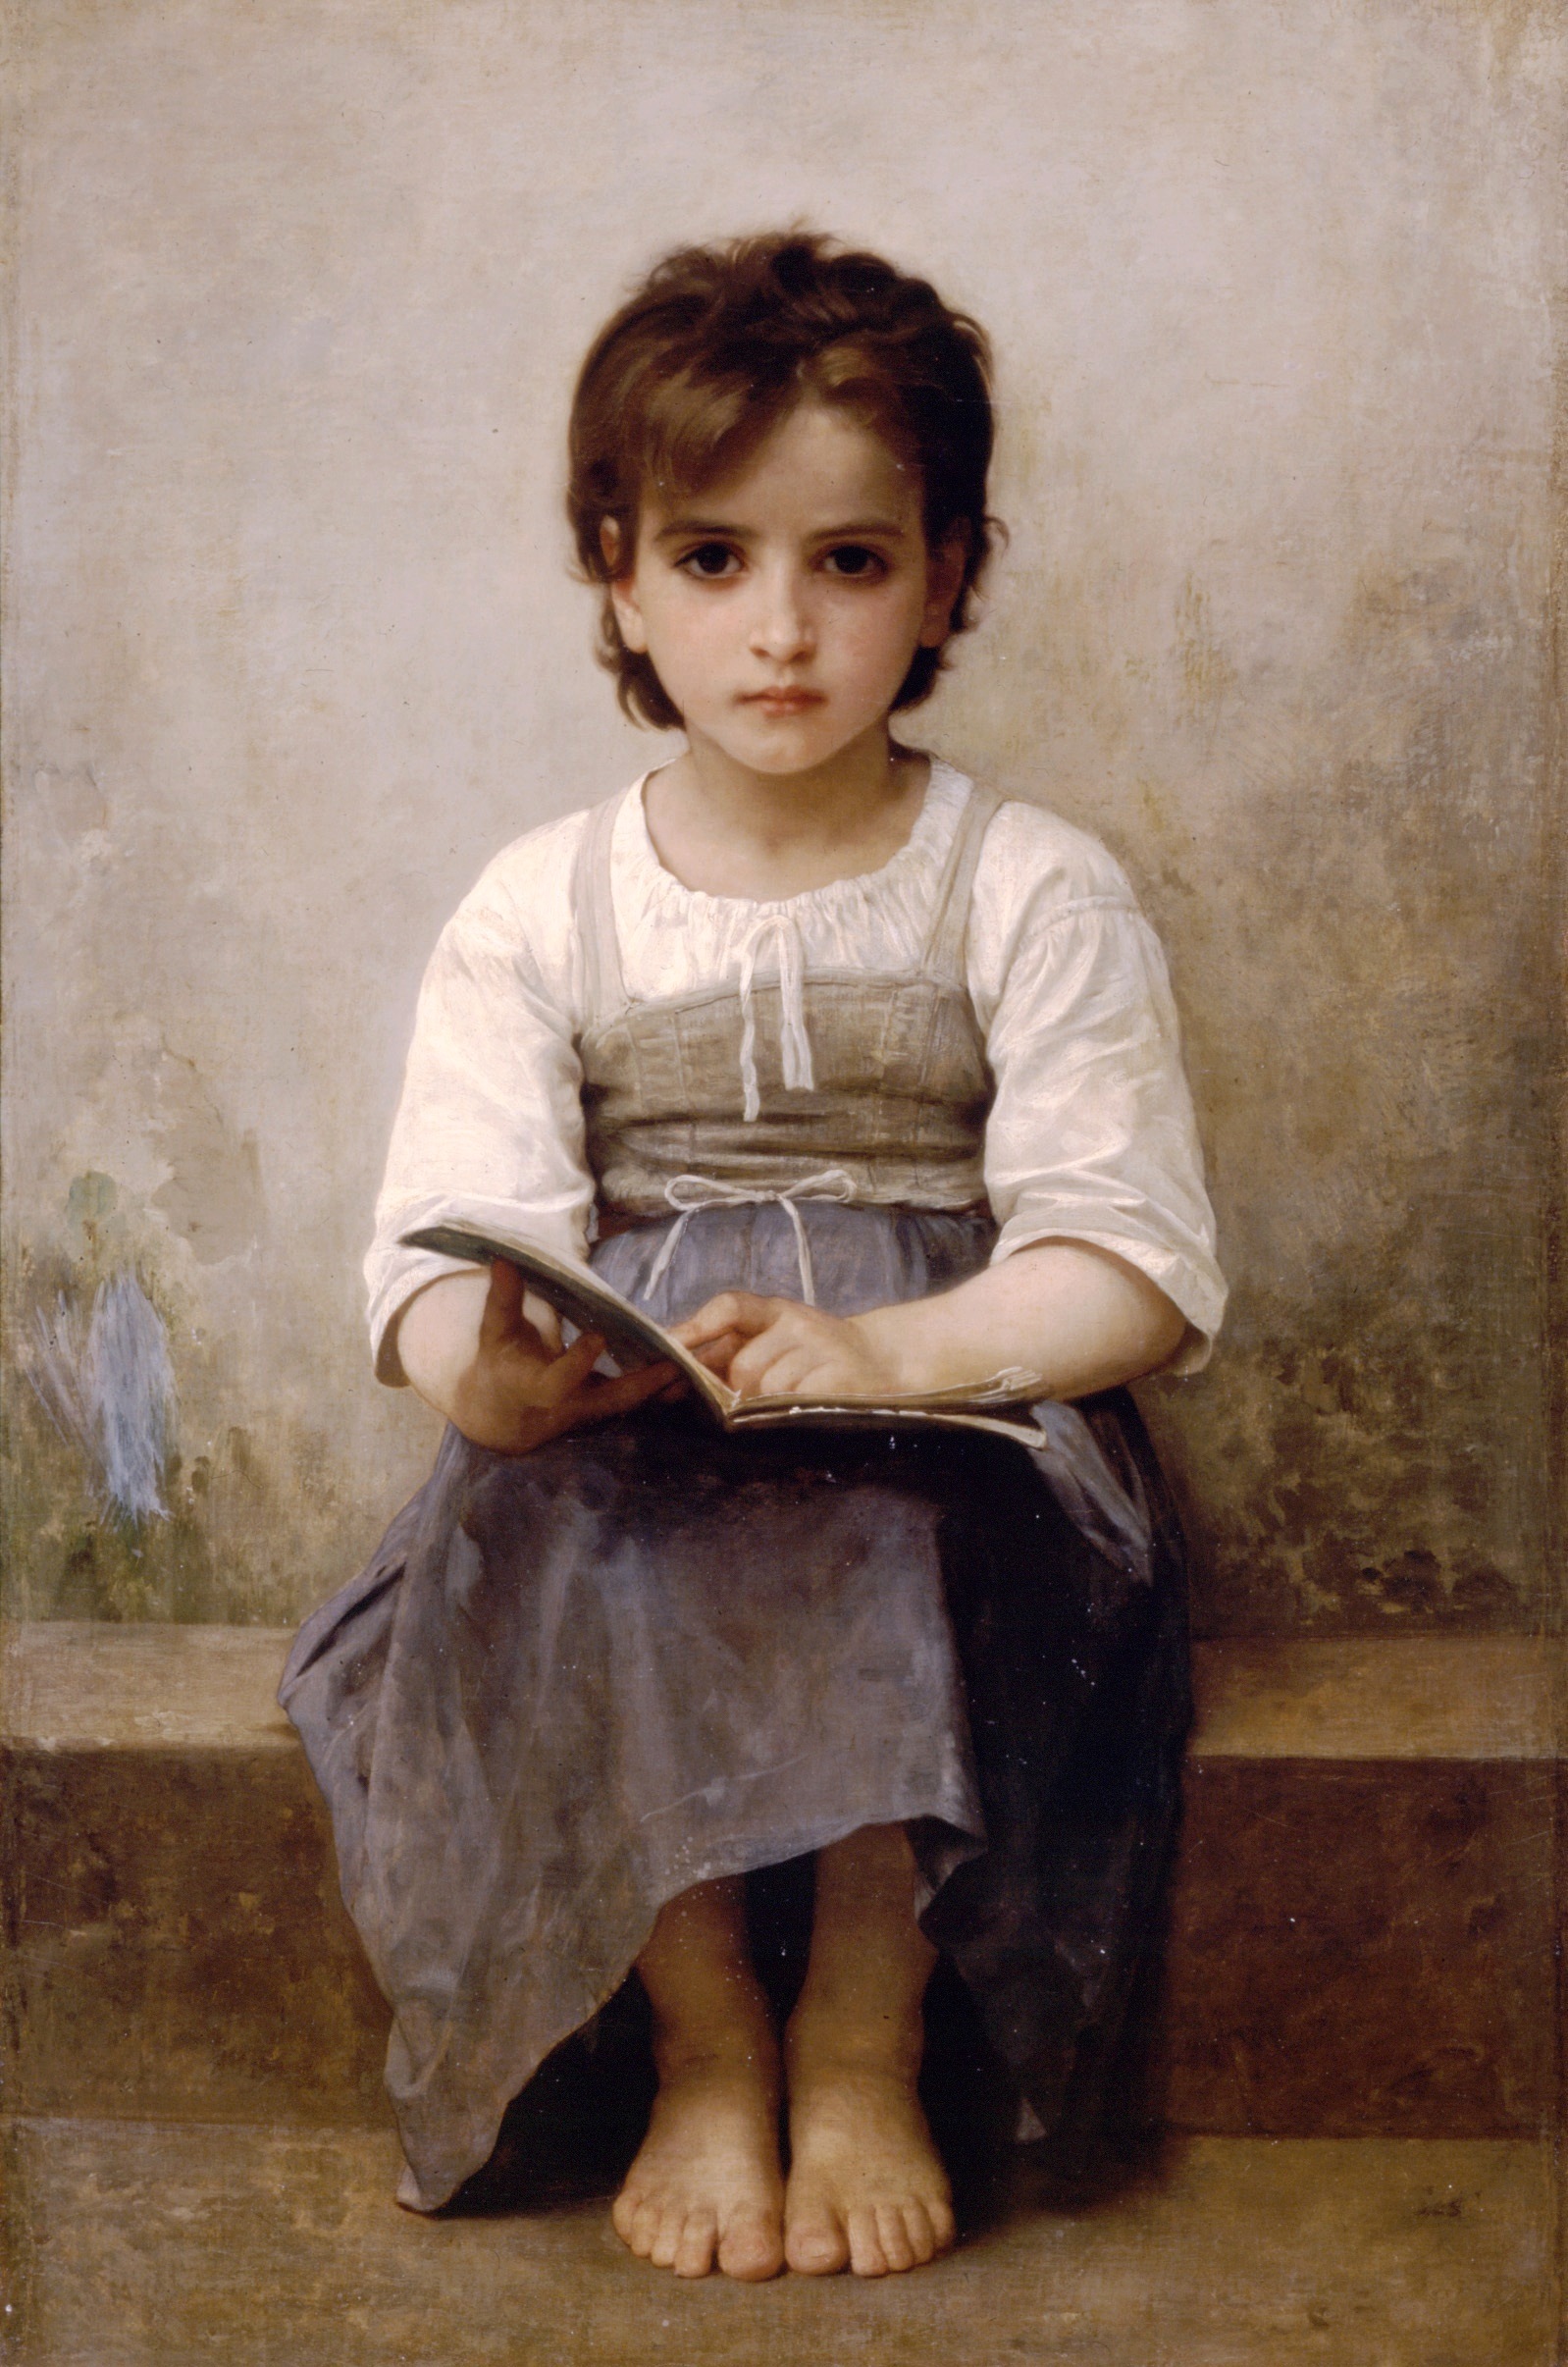 William-Adolphe_Bouguereau_(1825-1905)_-_The_Difficult_Lesson_(1884).jpg - Adolphe  Bouguereau